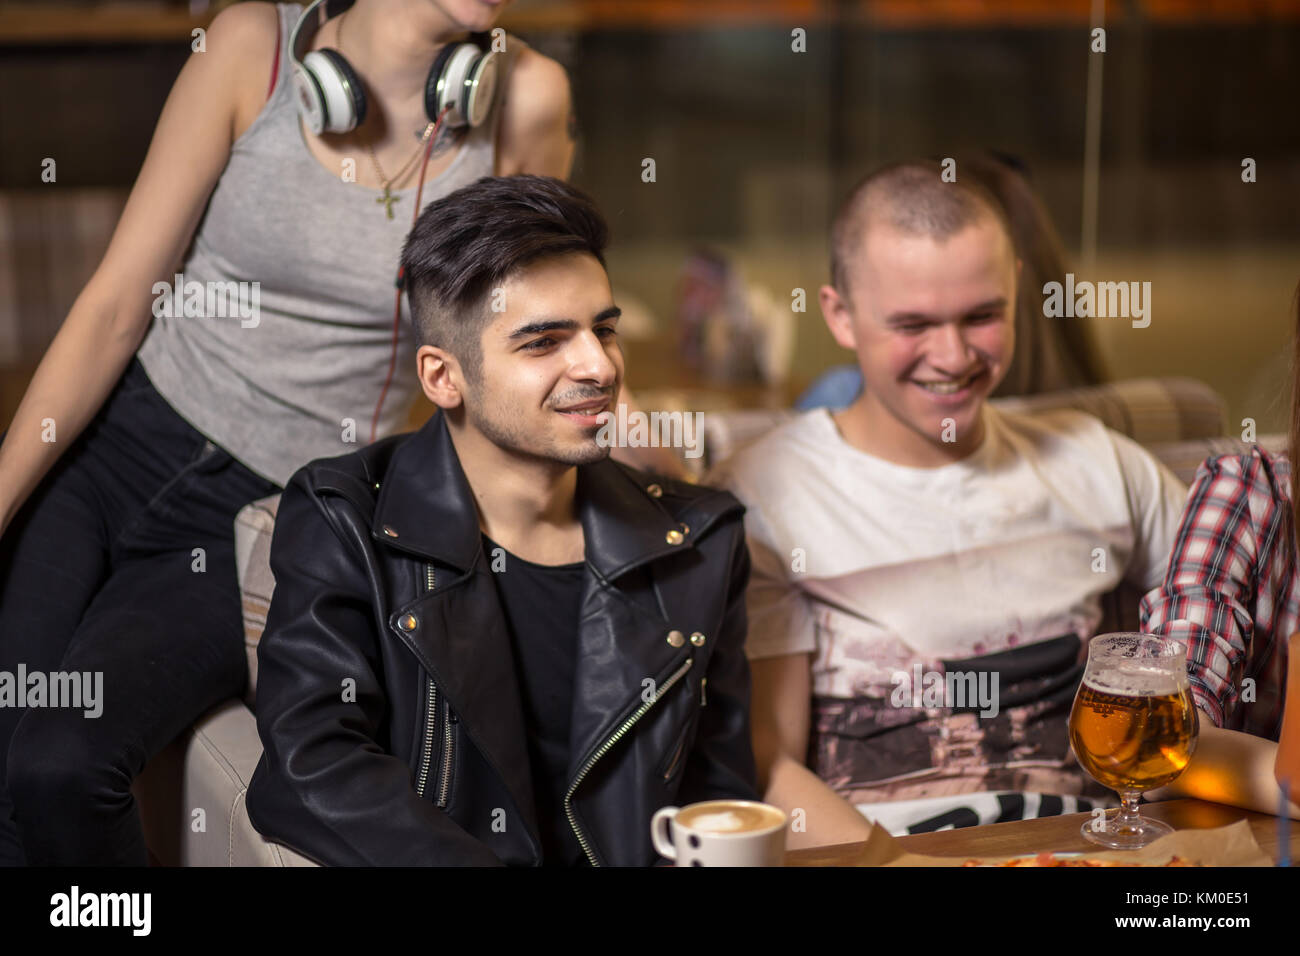 Group Of People Drinking Coffee in cafe Concept Stock Photo